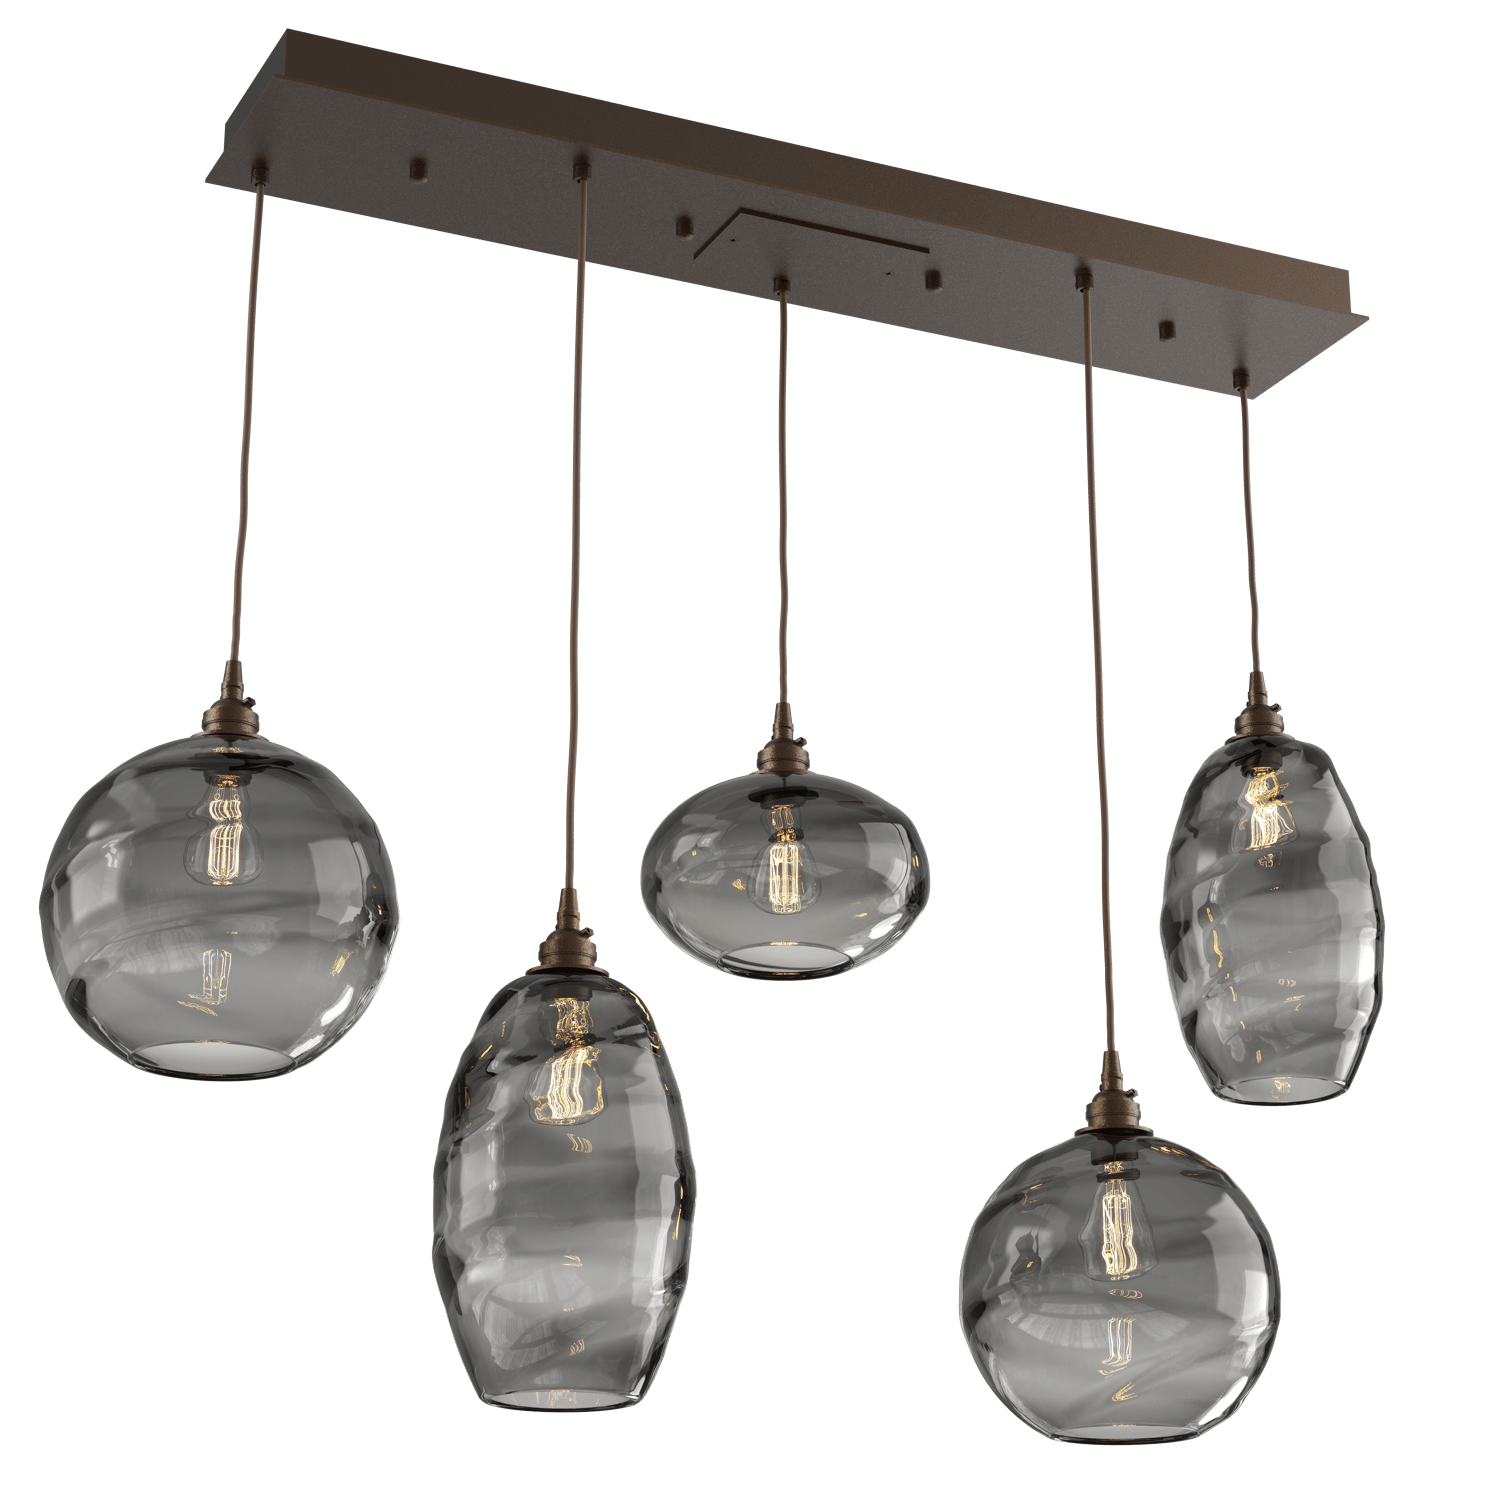 PLB0048-05-FB-OS-Hammerton-Studio-Optic-Blown-Glass-Misto-5-light-linear-pendant-chandelier-with-flat-bronze-finish-and-optic-smoke-blown-glass-shades-and-incandescent-lamping